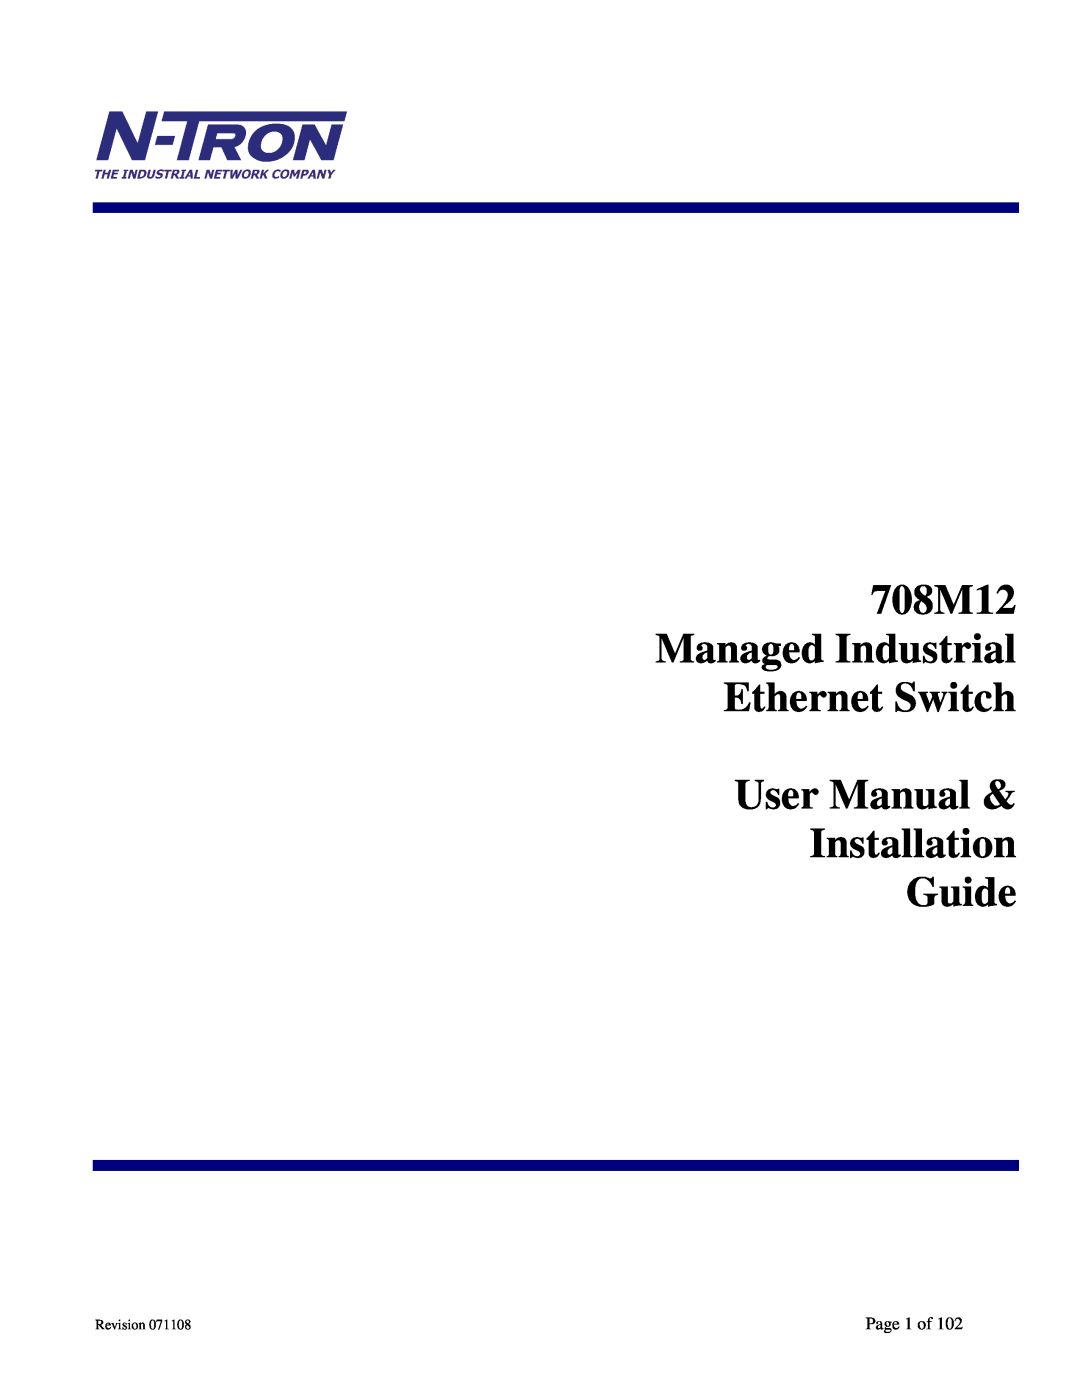 N-Tron user manual 708M12 Managed Industrial Ethernet Switch User Manual Installation, Guide, Page 1 of, Revision 